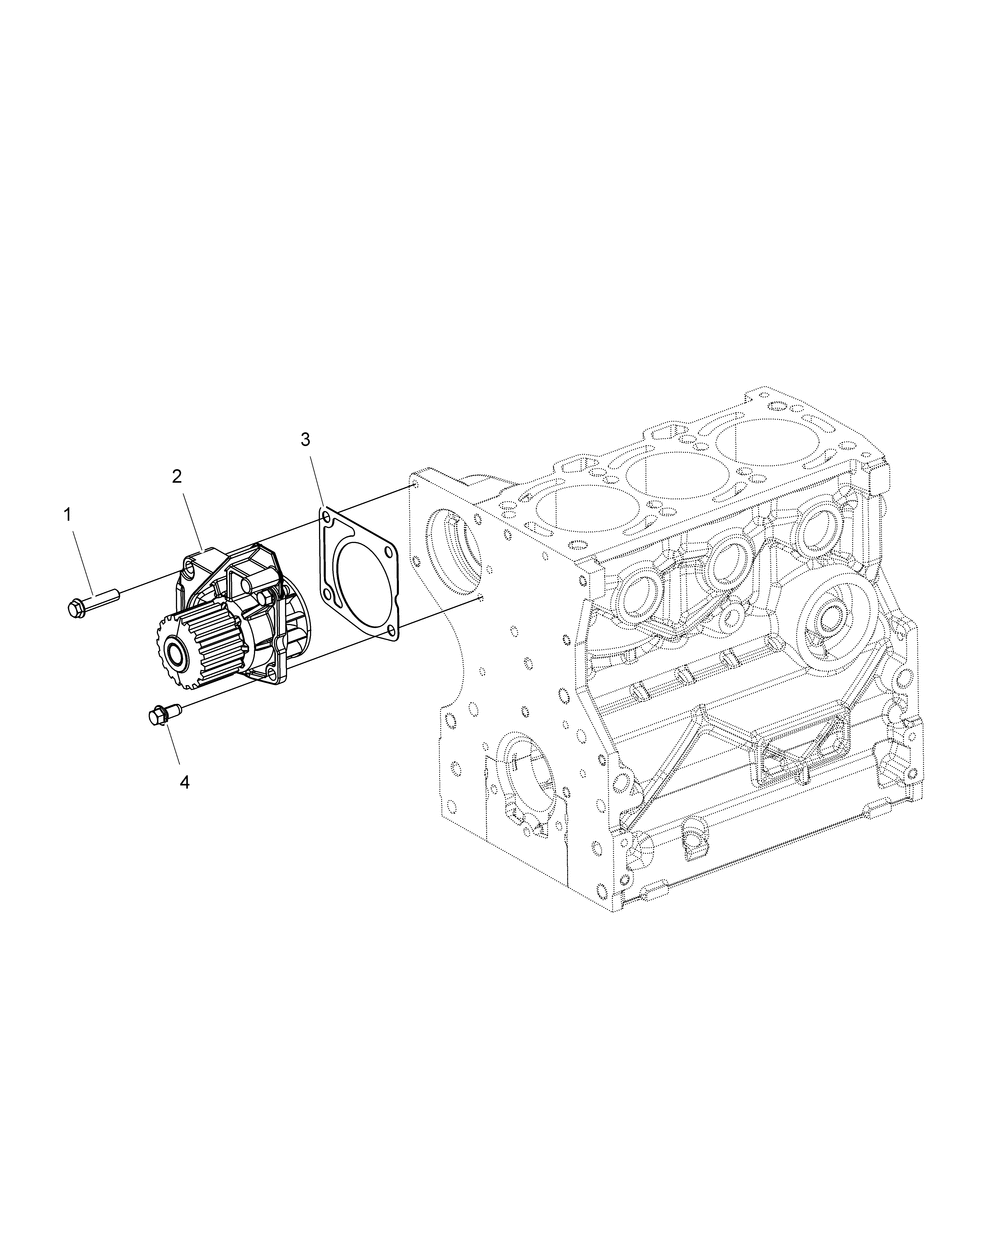 Engine water pump - r151dpd1aa_2d